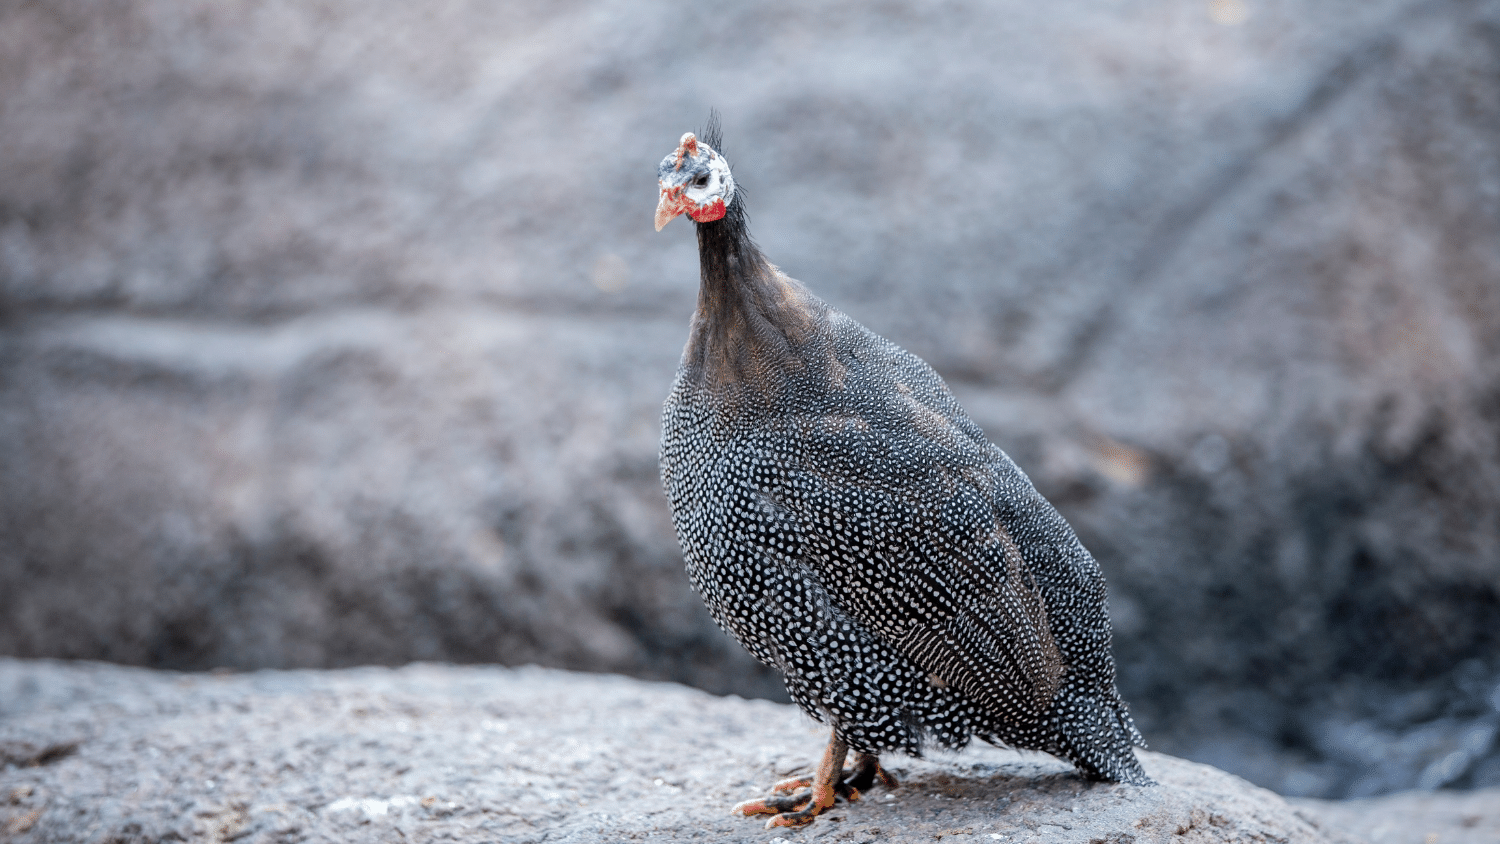 What to feed Guinea Hens